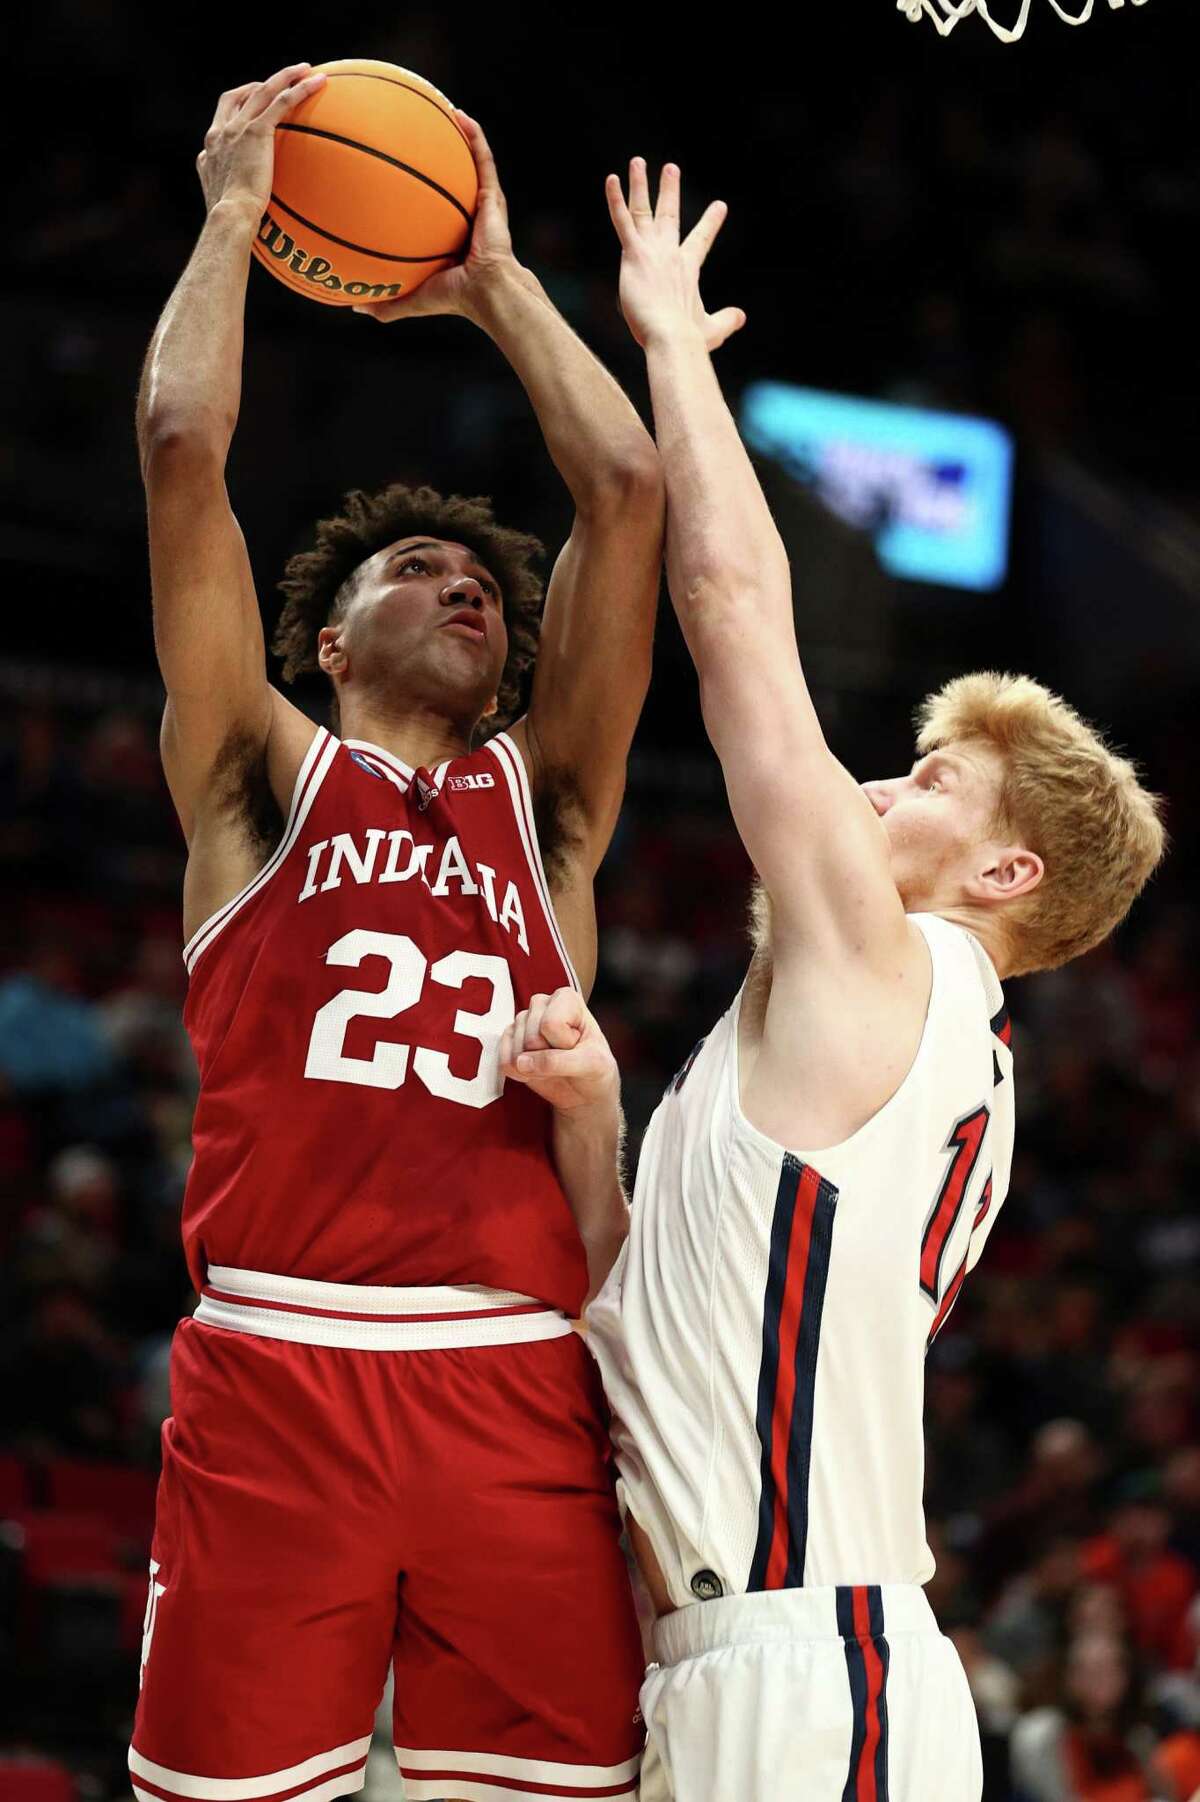 PORTLAND, OREGON - MARCH 17: Trayce Jackson-Davis #23 of the Indiana Hoosiers goes up for a shot Matthias Tass #11 of the St. Mary's Gaels in the first round game of the 2022 NCAA Men's Basketball Tournament at Moda Center on March 17, 2022 in Portland, Oregon. (Photo by Ezra Shaw/Getty Images)